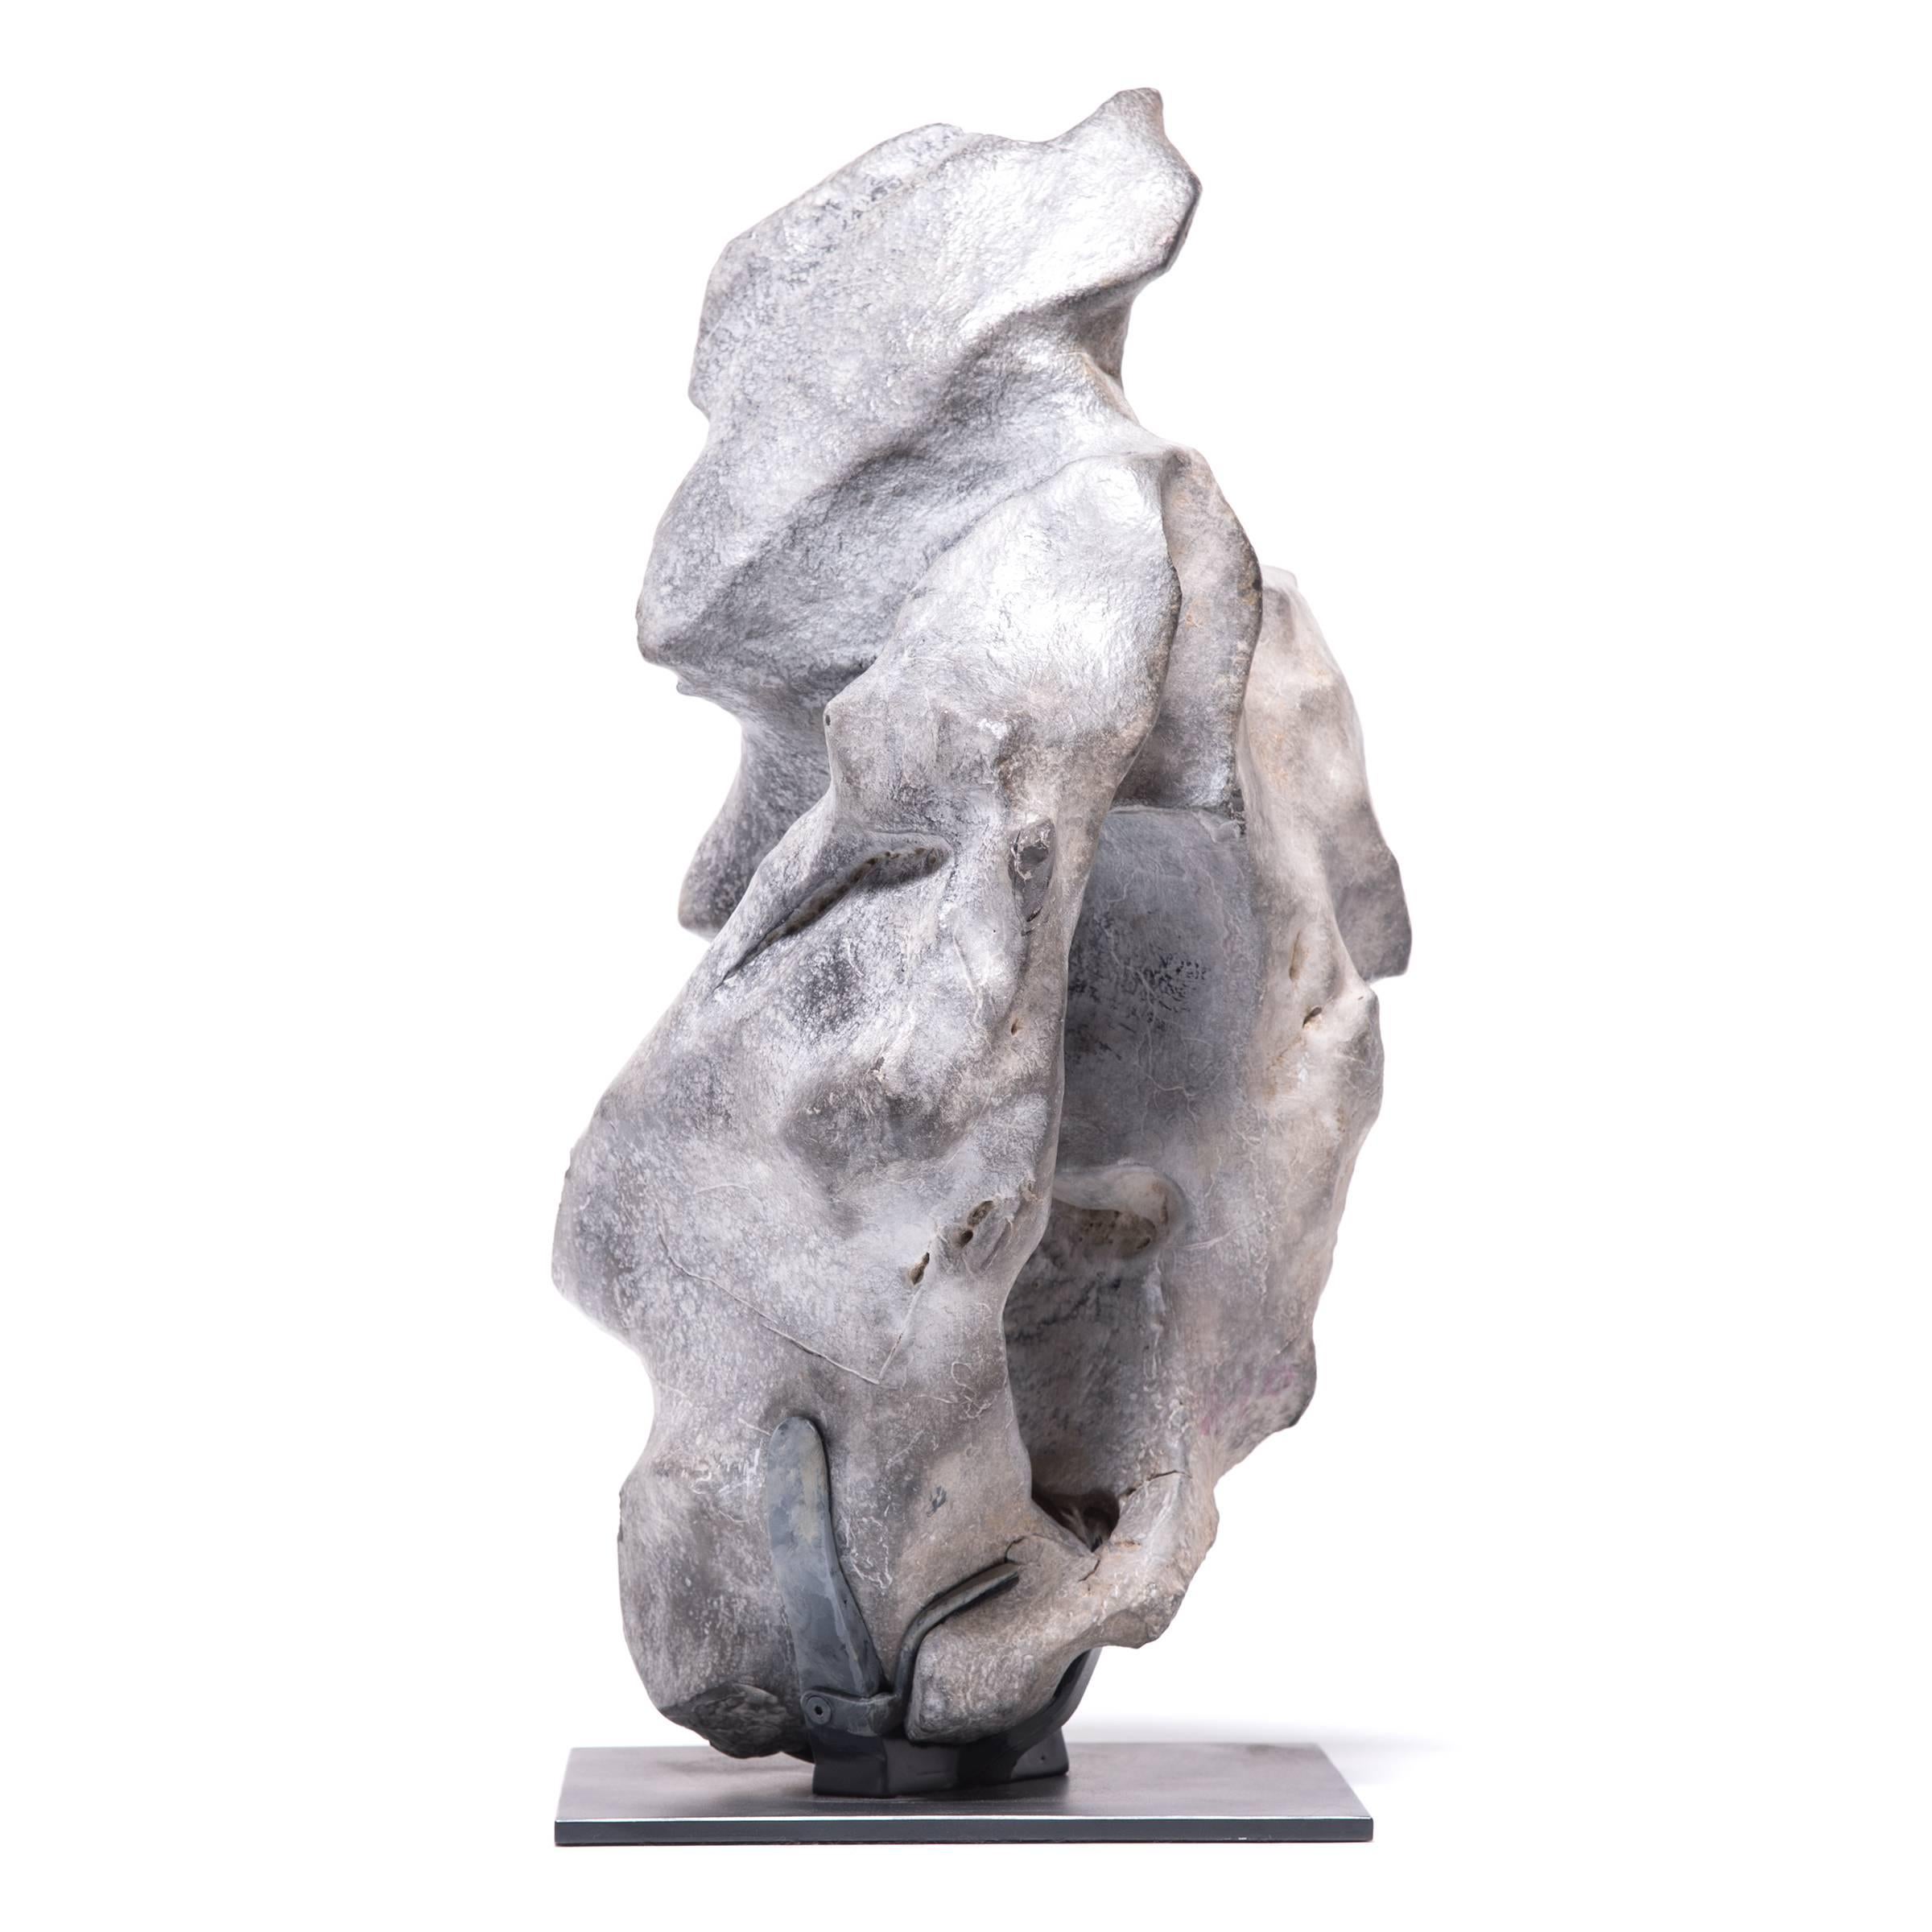 Prized for their unique formations, scholars' stones have been valued as sculptural objects of contemplation for hundreds of years. Wonderfully suggestive in form, the stones are open to thoughtful interpretation or simply enjoyed as abstract